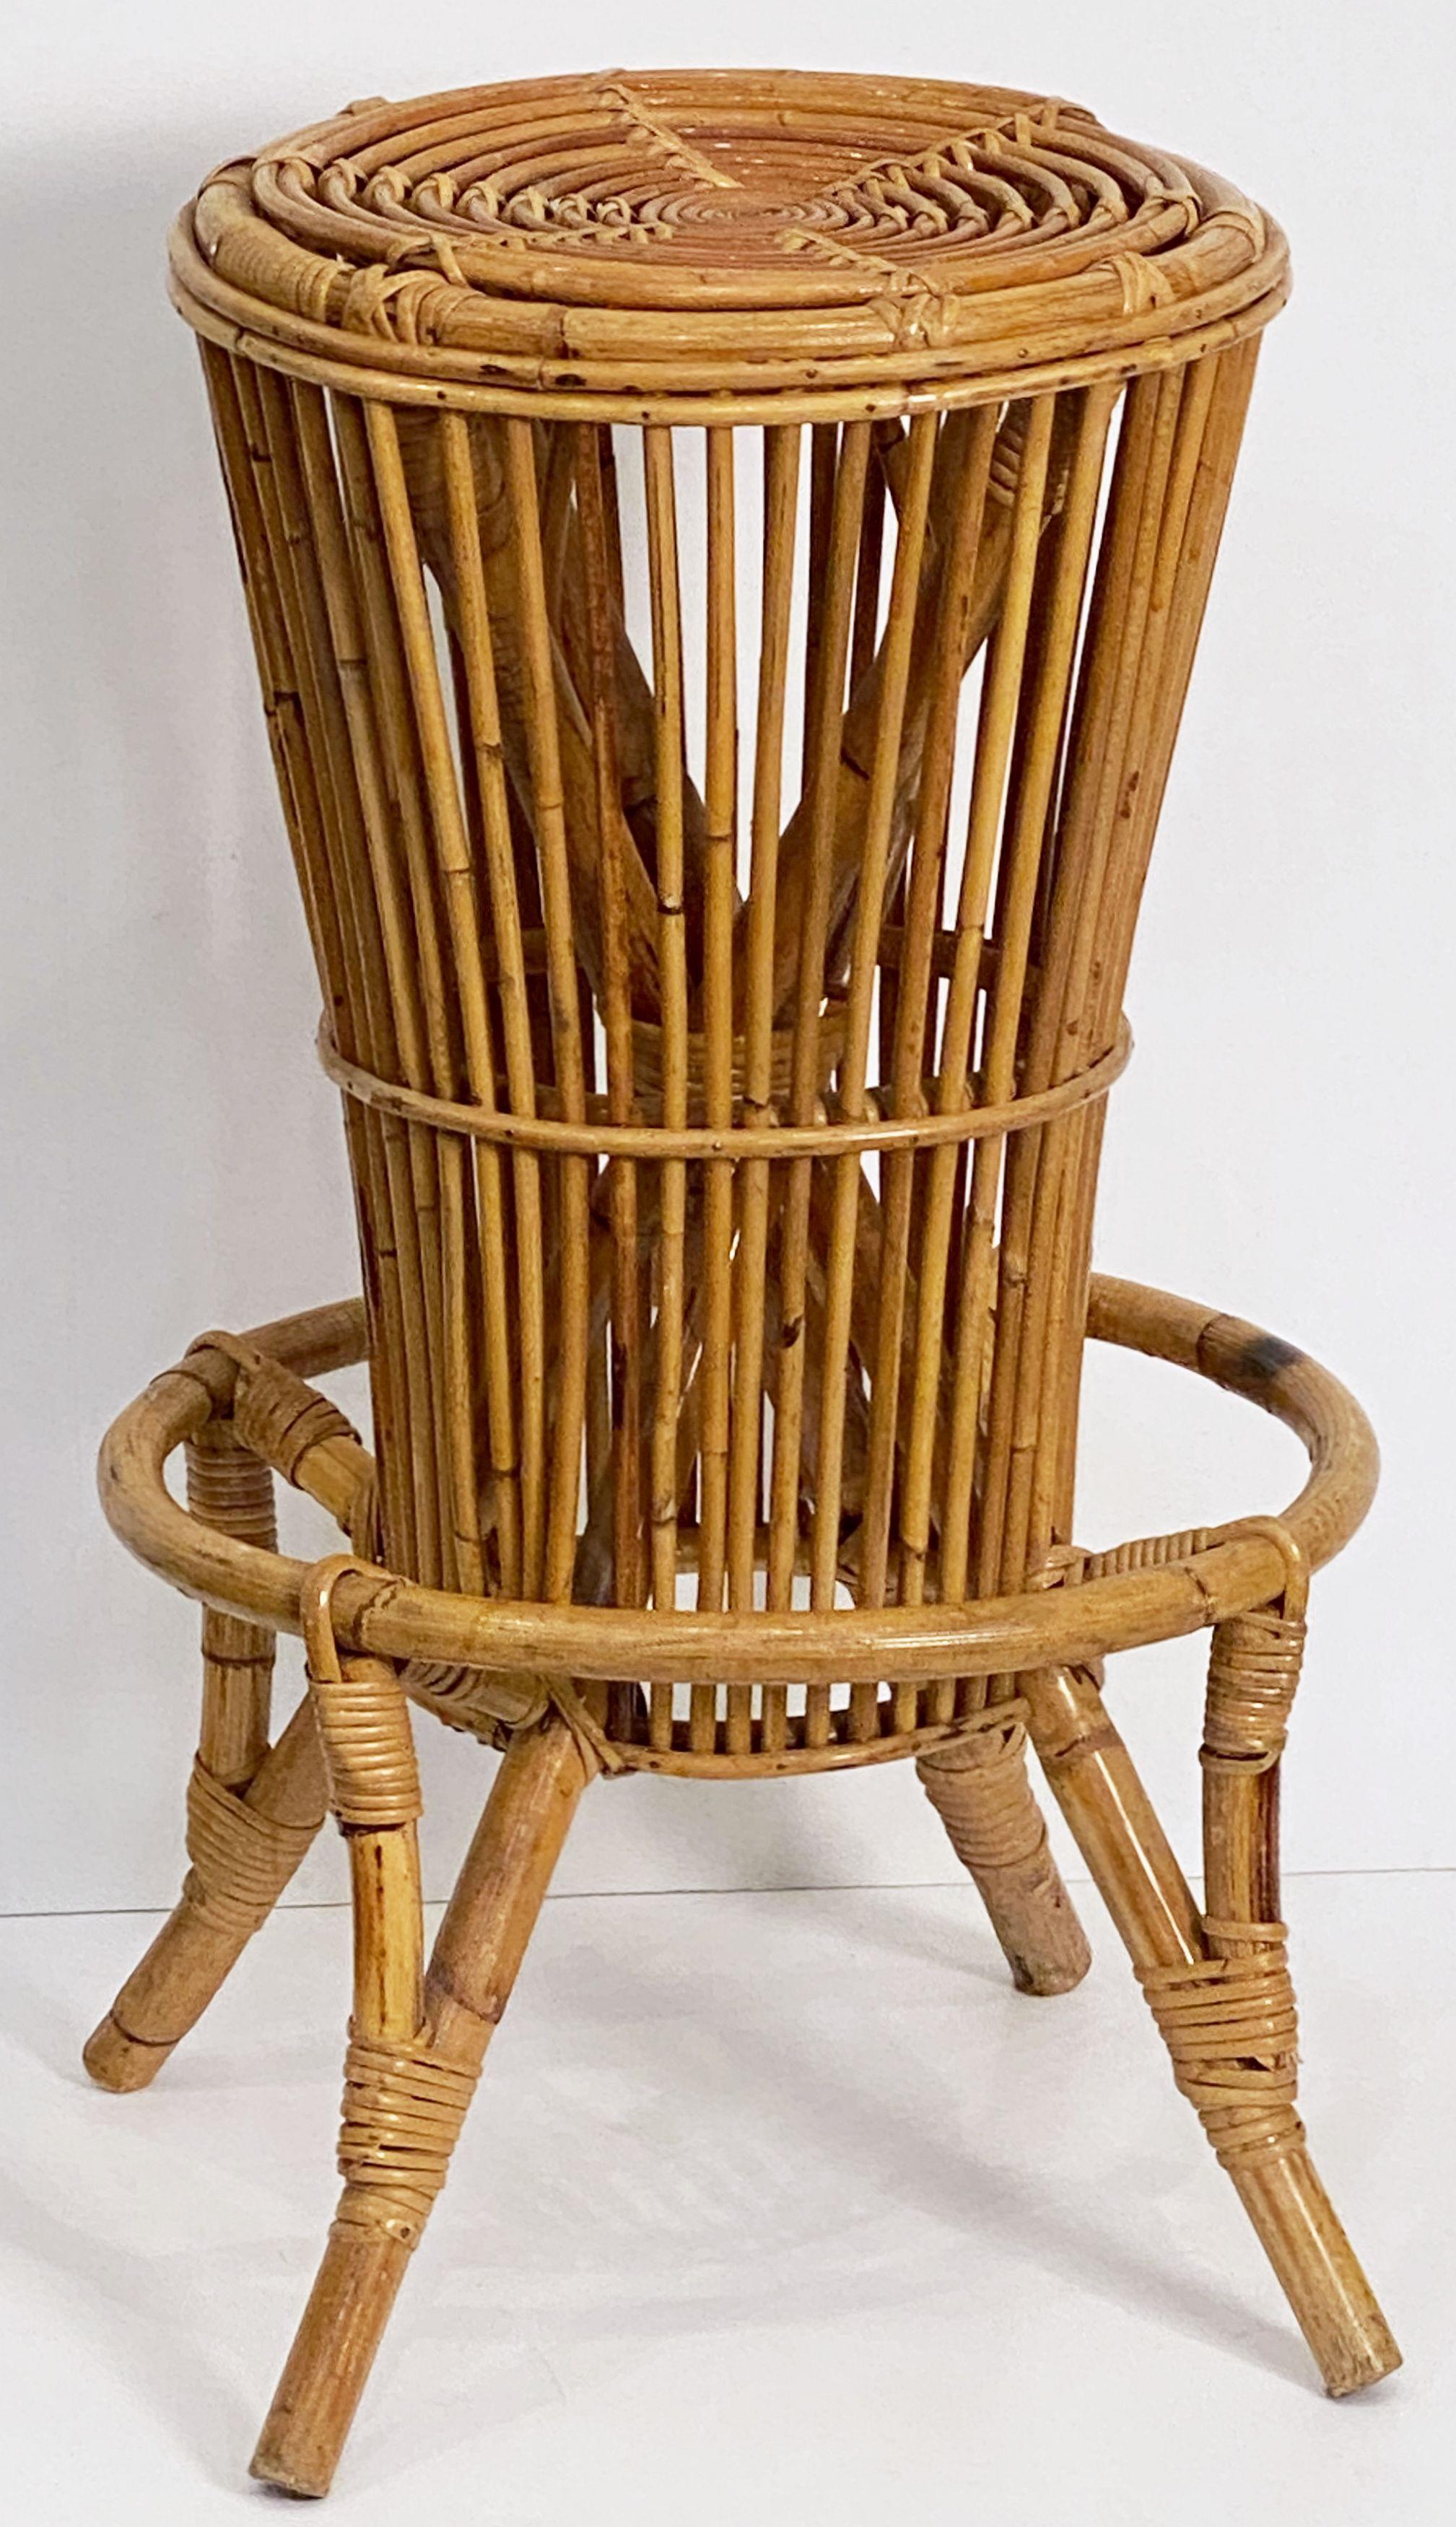 A fine vintage Italian bar stool from the mid-20th century of woven rattan and bamboo featuring a stylish design to the back, seat, and legs.

Two available.